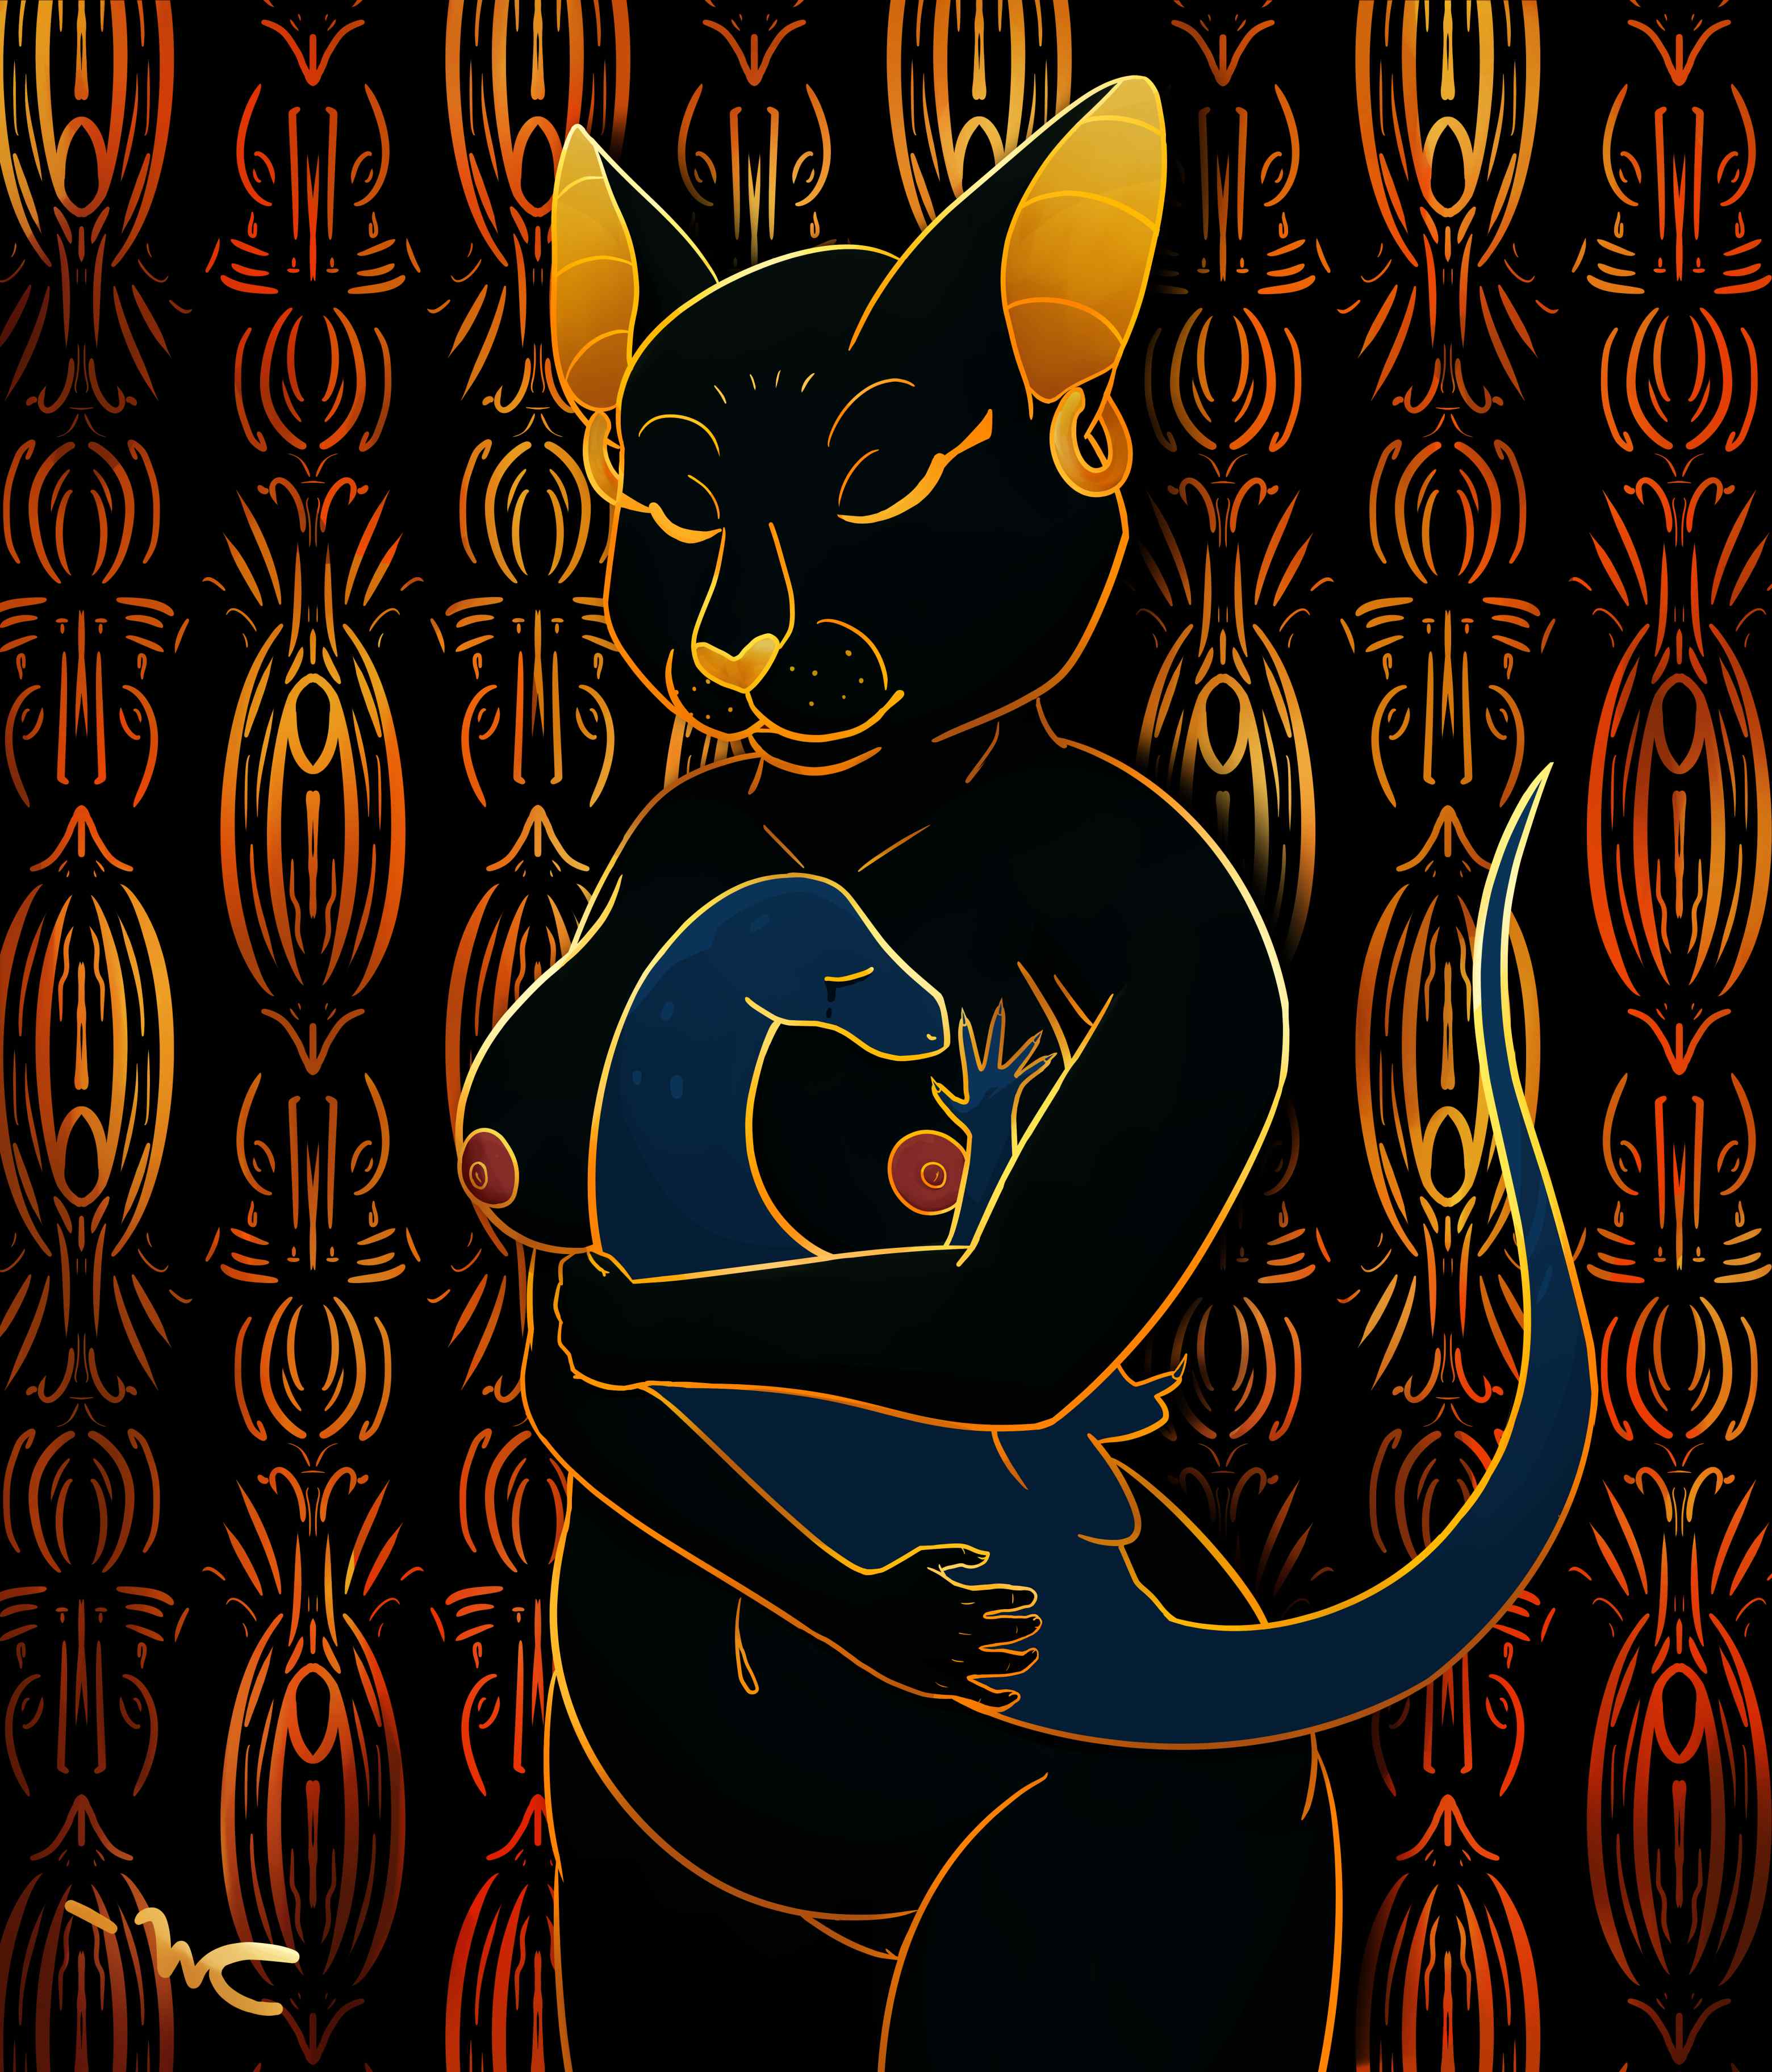 The Egyptian Goddess Bastet gently holding a crying monitor lizard. She is nude. The image is mostly black and gold, but the lizard is blue and Bastet's nipples are pink.